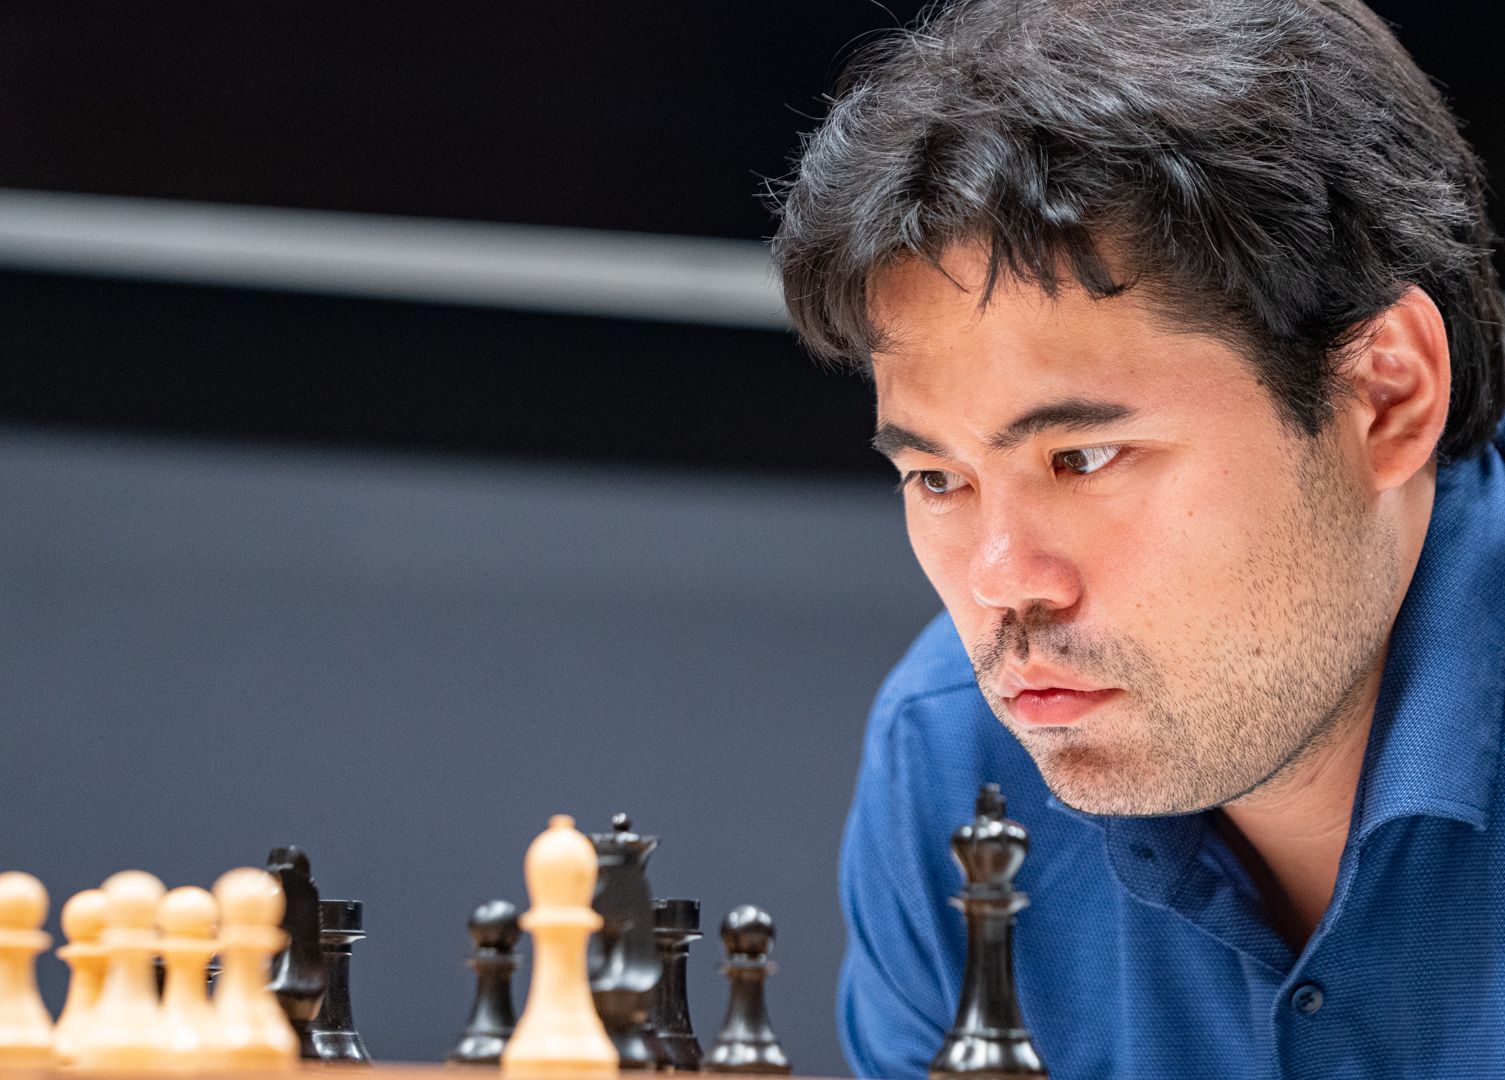 The previous world champion Wesley So helped the new world champion Hikaru  Nakamura prepare for the Armageddon in the finals of the Fischer Random  World Championship! : r/chess